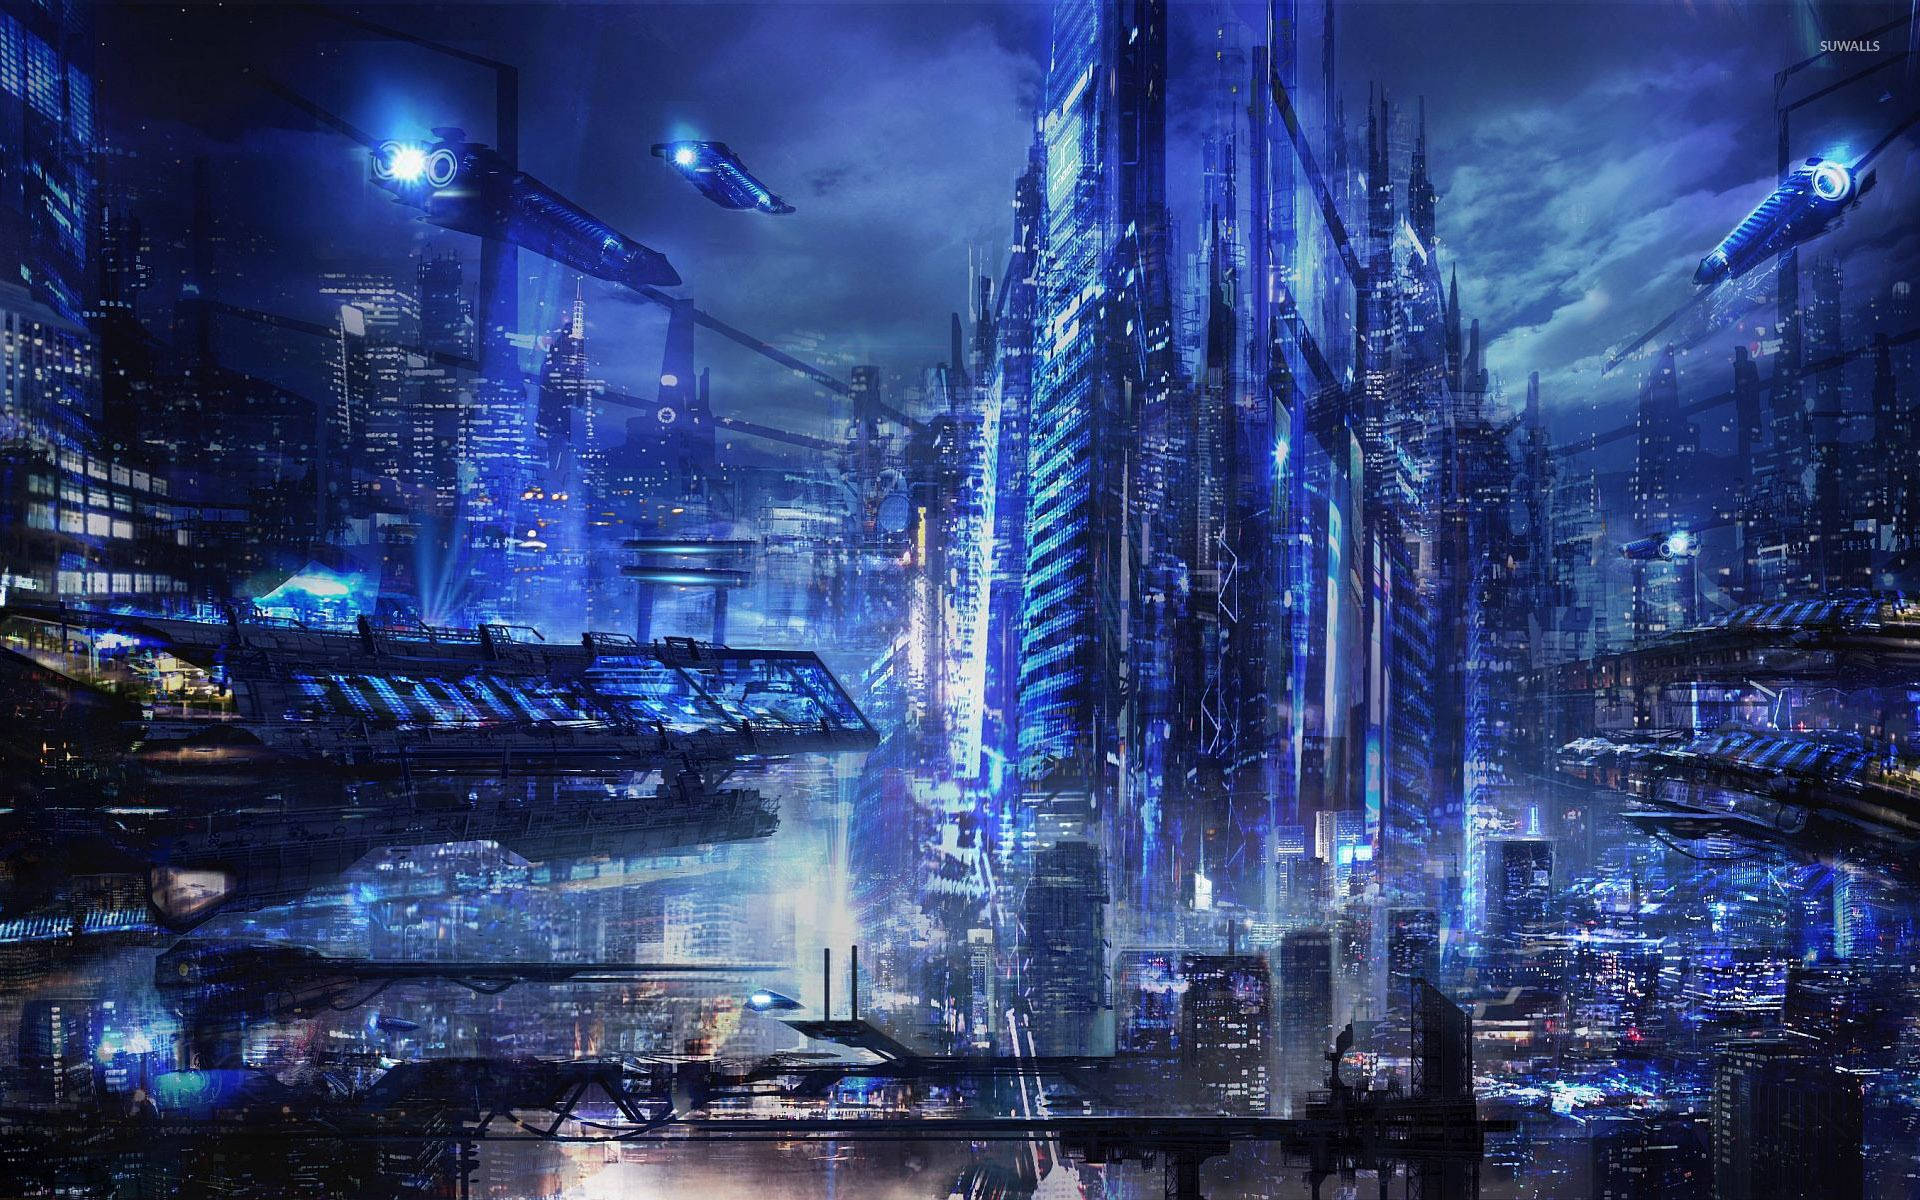 A futuristic city with blue lighting and buildings - Cyberpunk